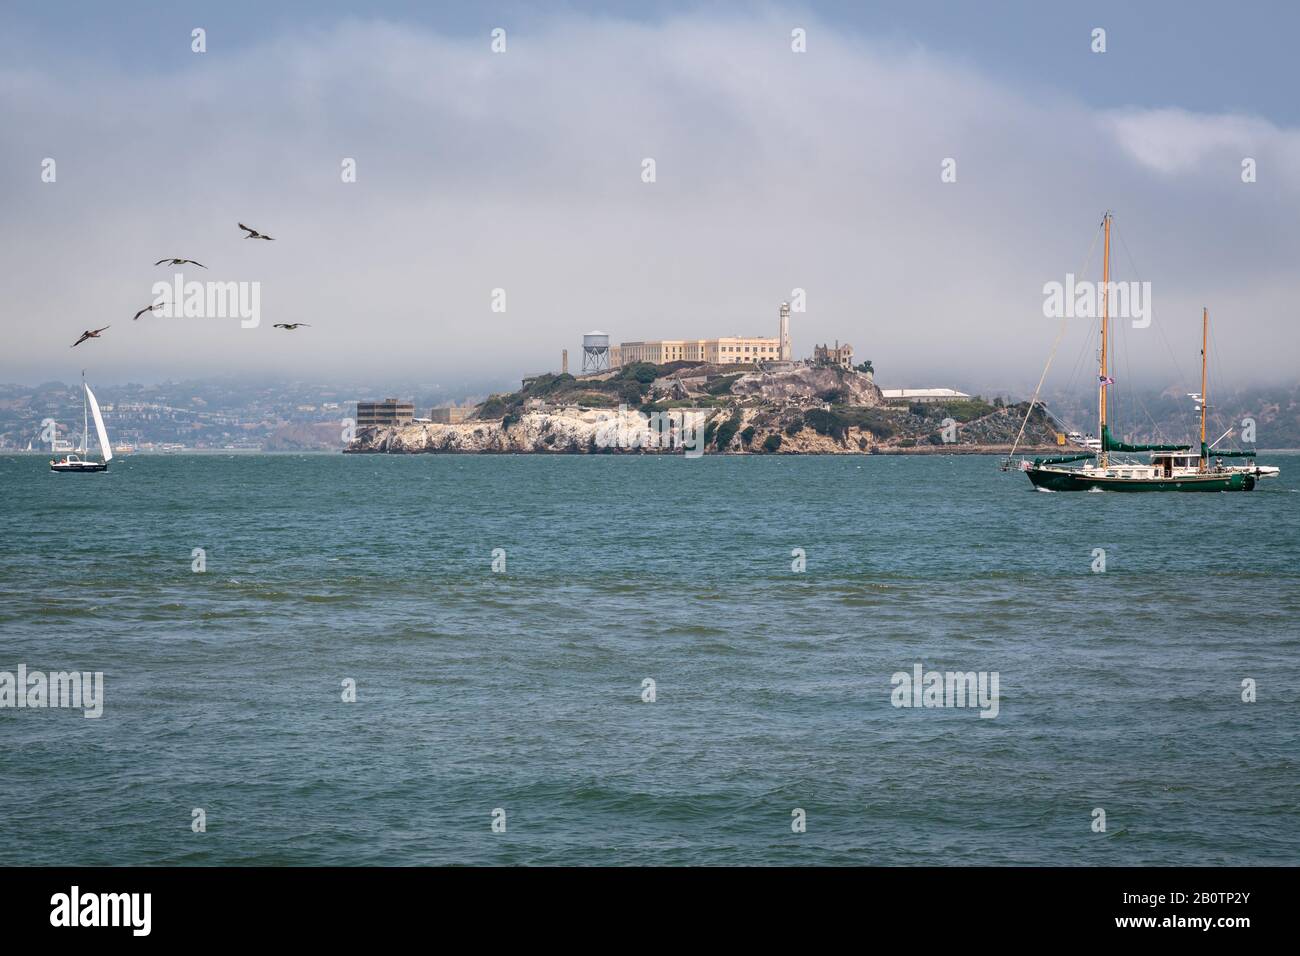 Alcatraz is one of the most iconic landmarks in America and worldly, notorious for its grim past and famous jailbreak escape, It's a wonderful sight. Stock Photo